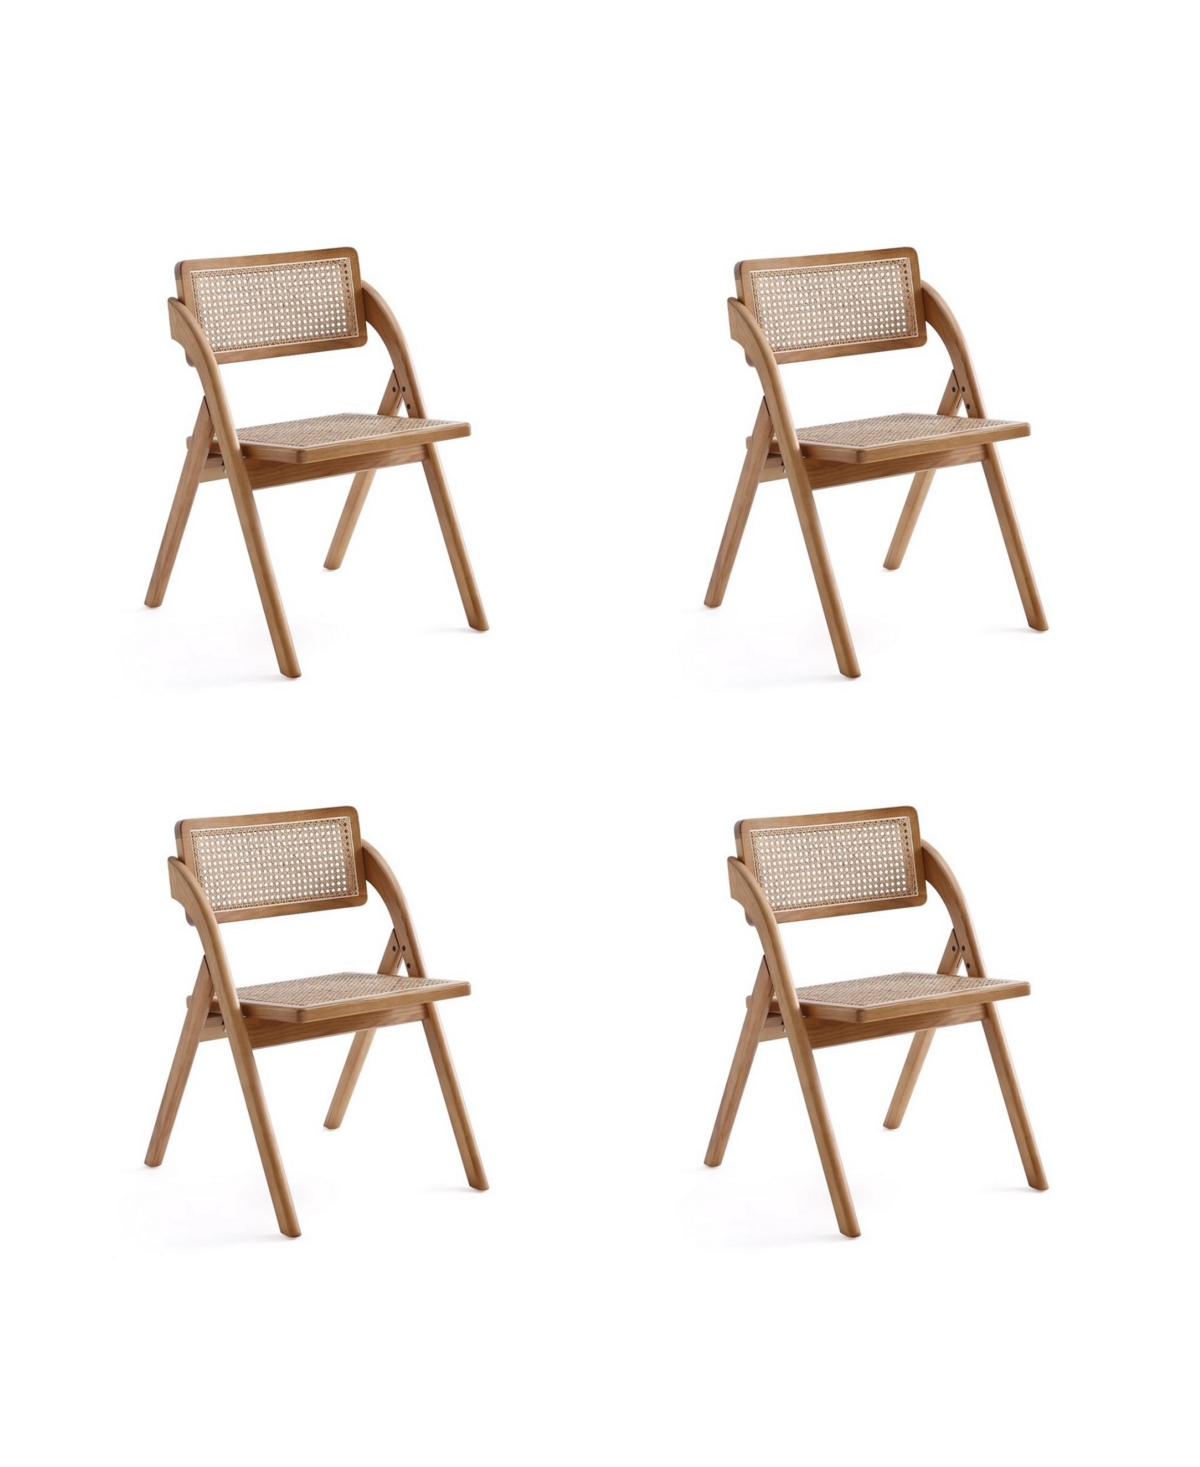 Manhattan Comfort Lambinet 4-piece Ash Wood And Natural Cane Folding Dining Chair In Nature